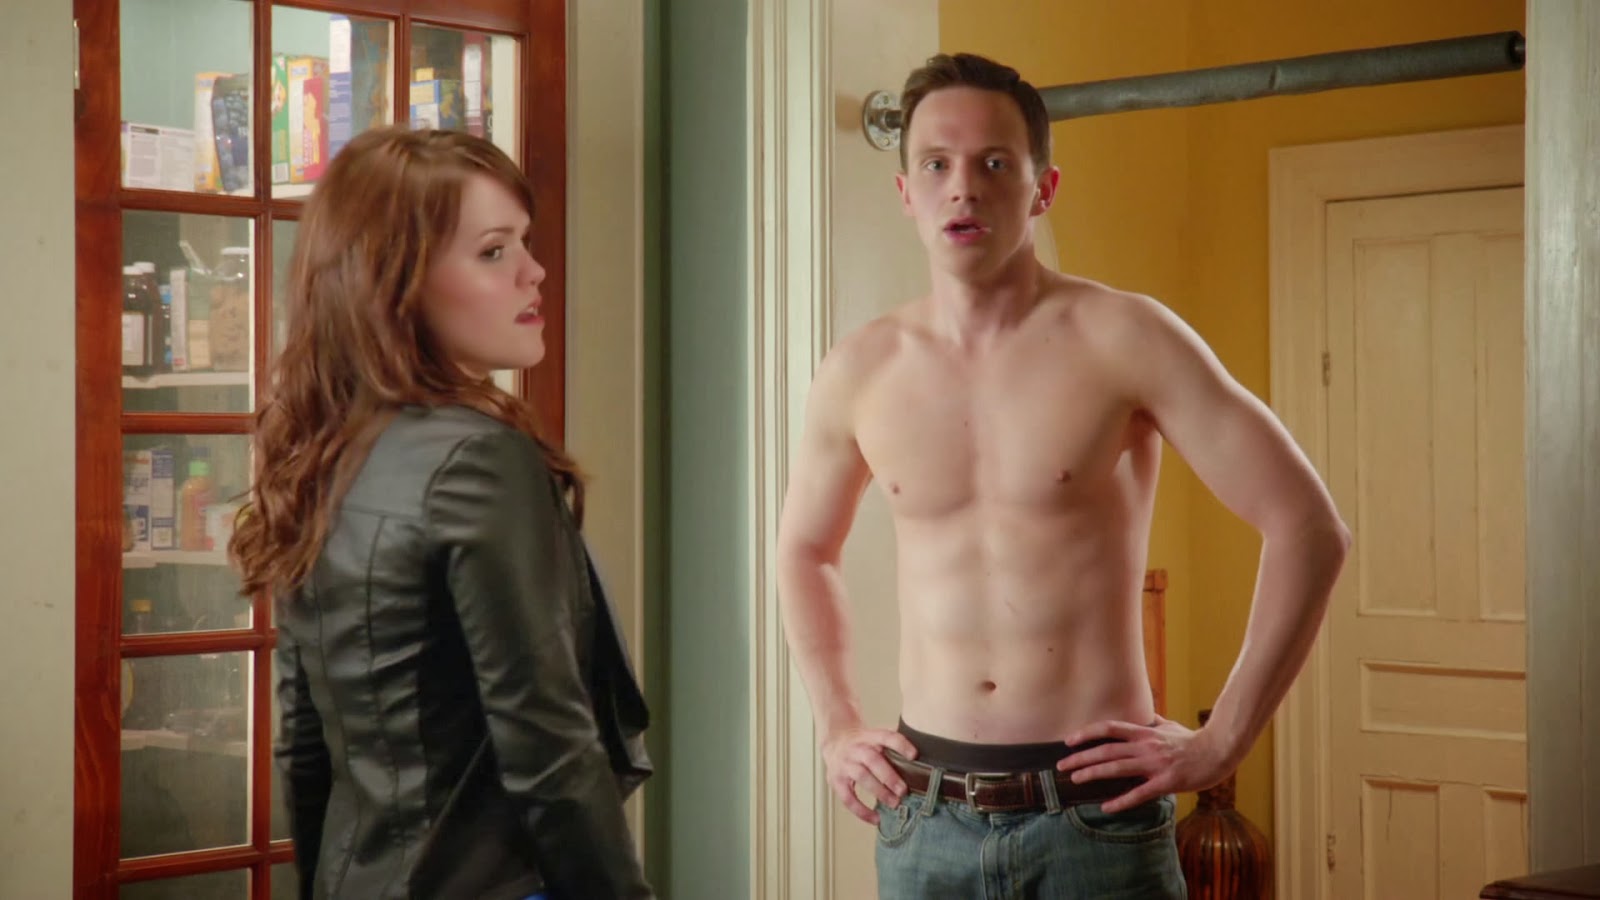 The Stars Come Out To Play Mark OBrien Shirtless In Republic Of Doyle.